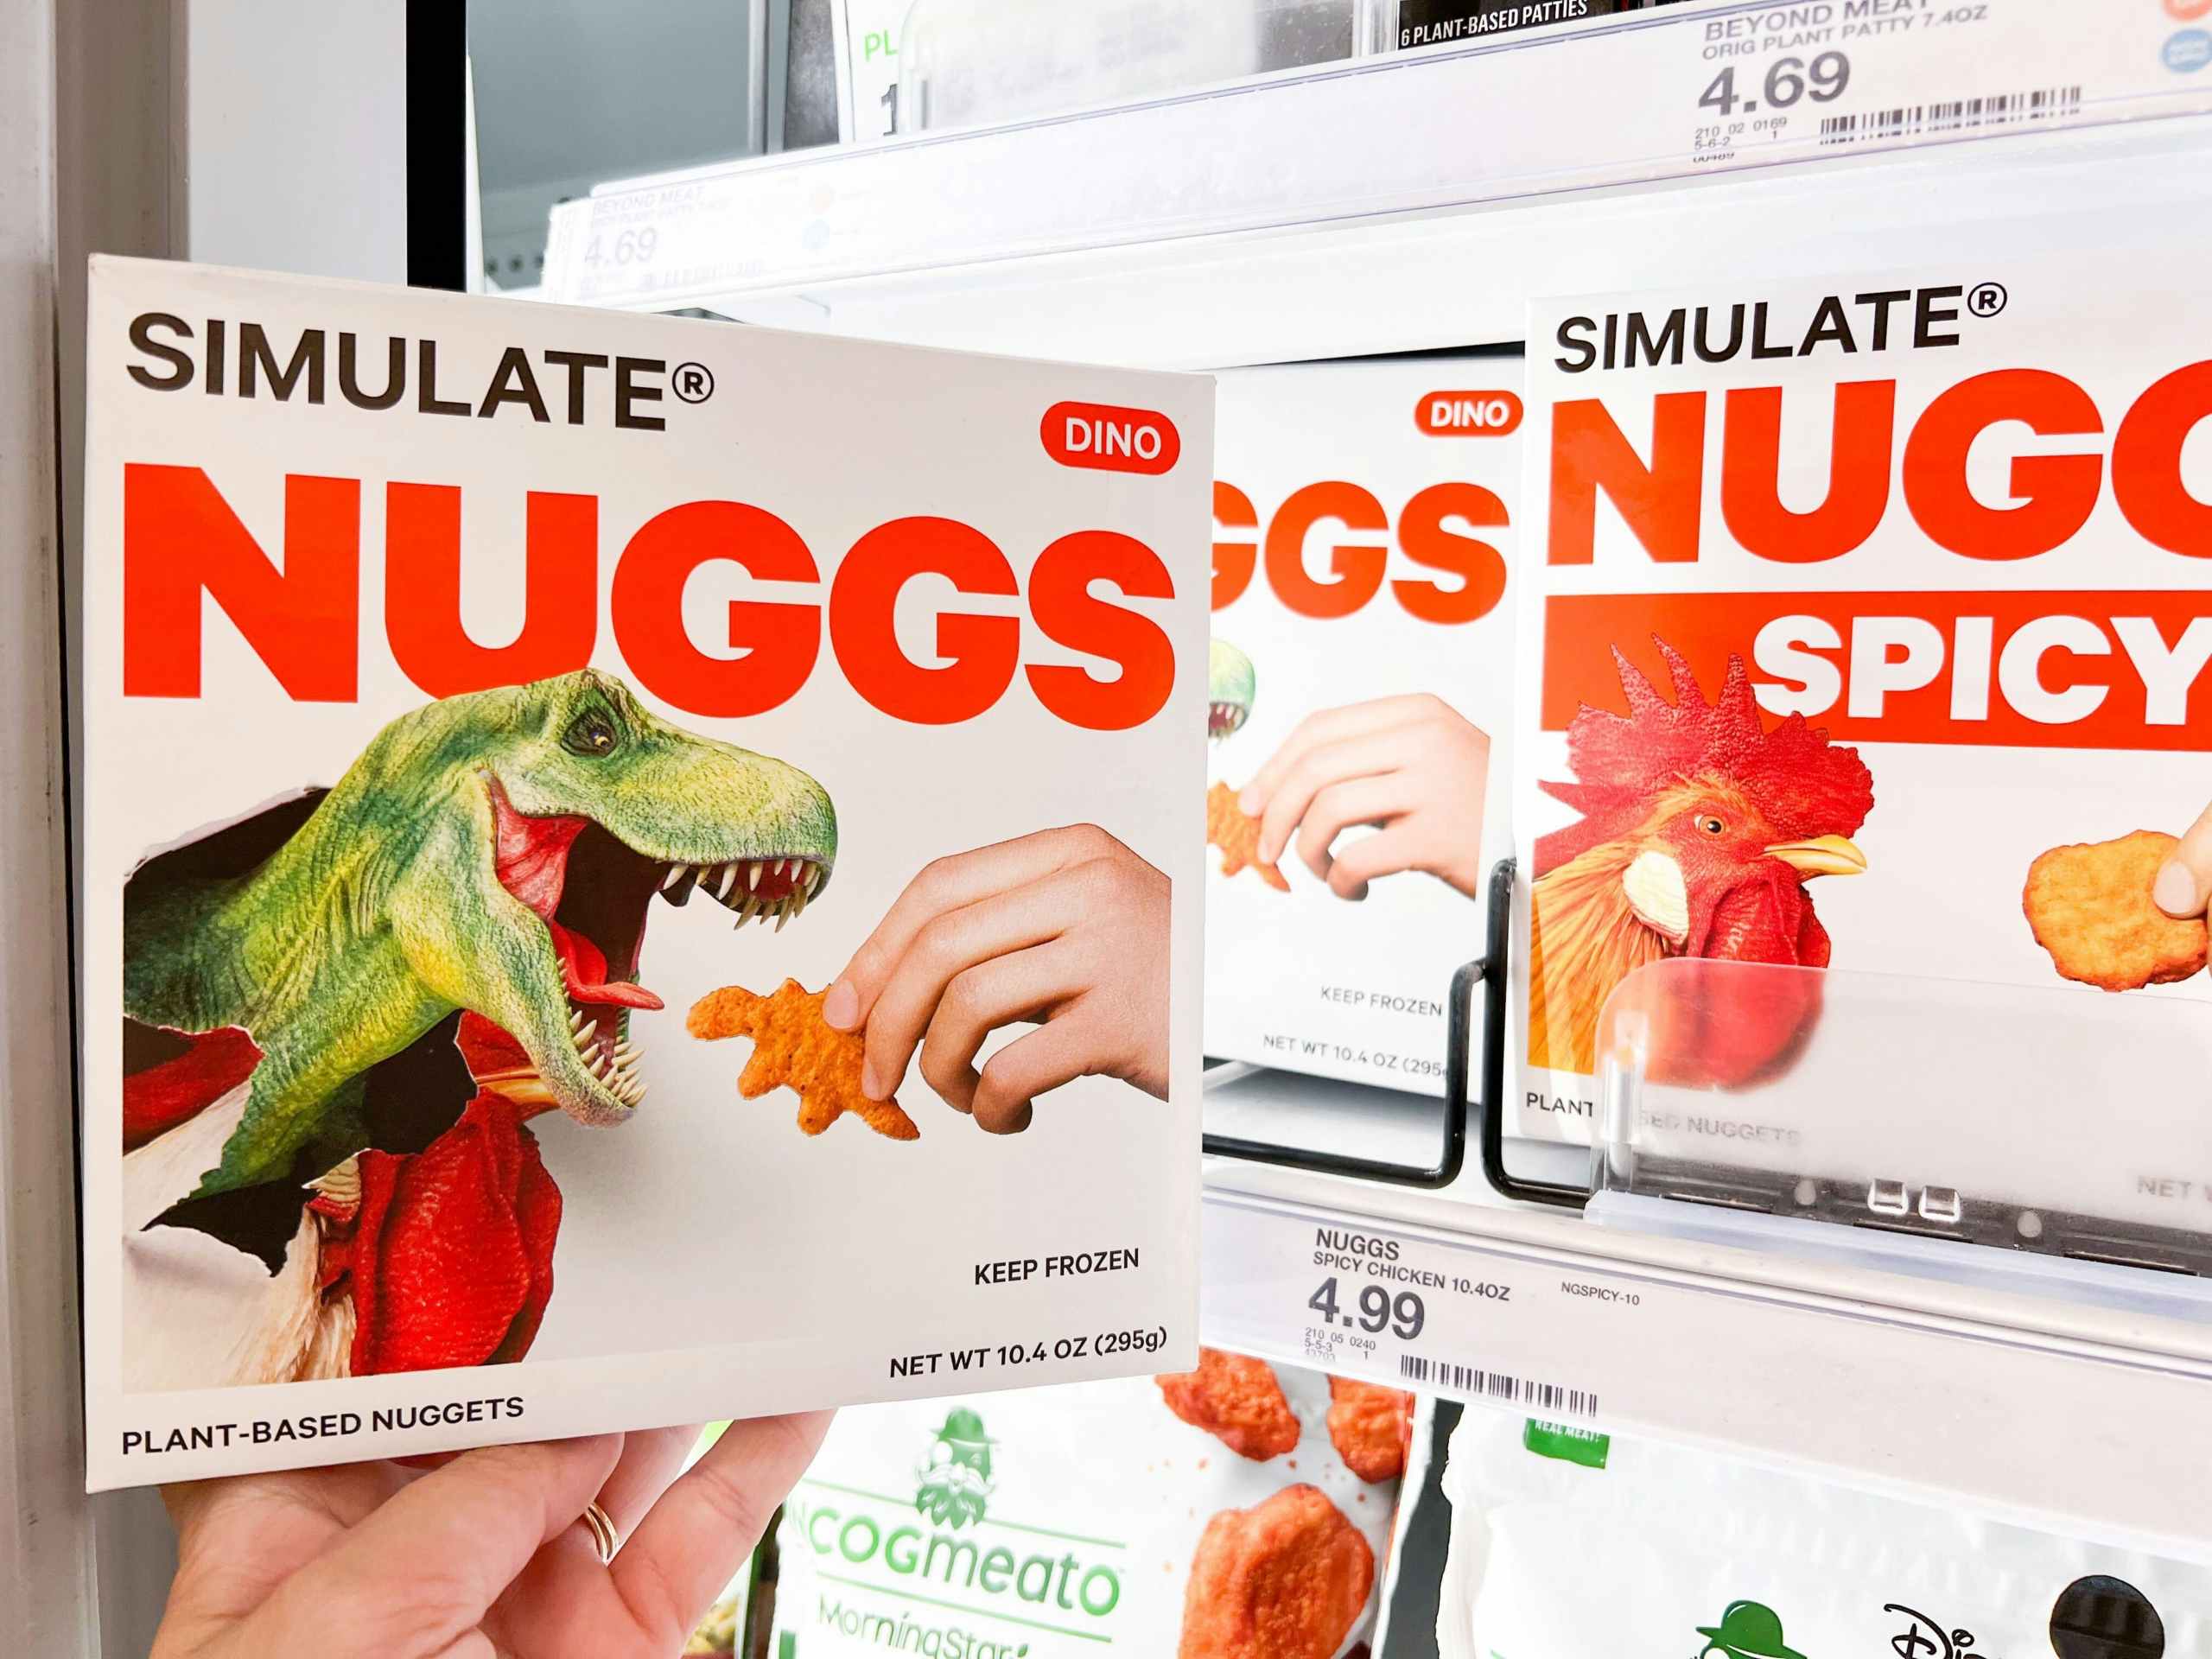 hand holding a box of Simulate Nuggs Dinos in front of like items in a Target storage freezer